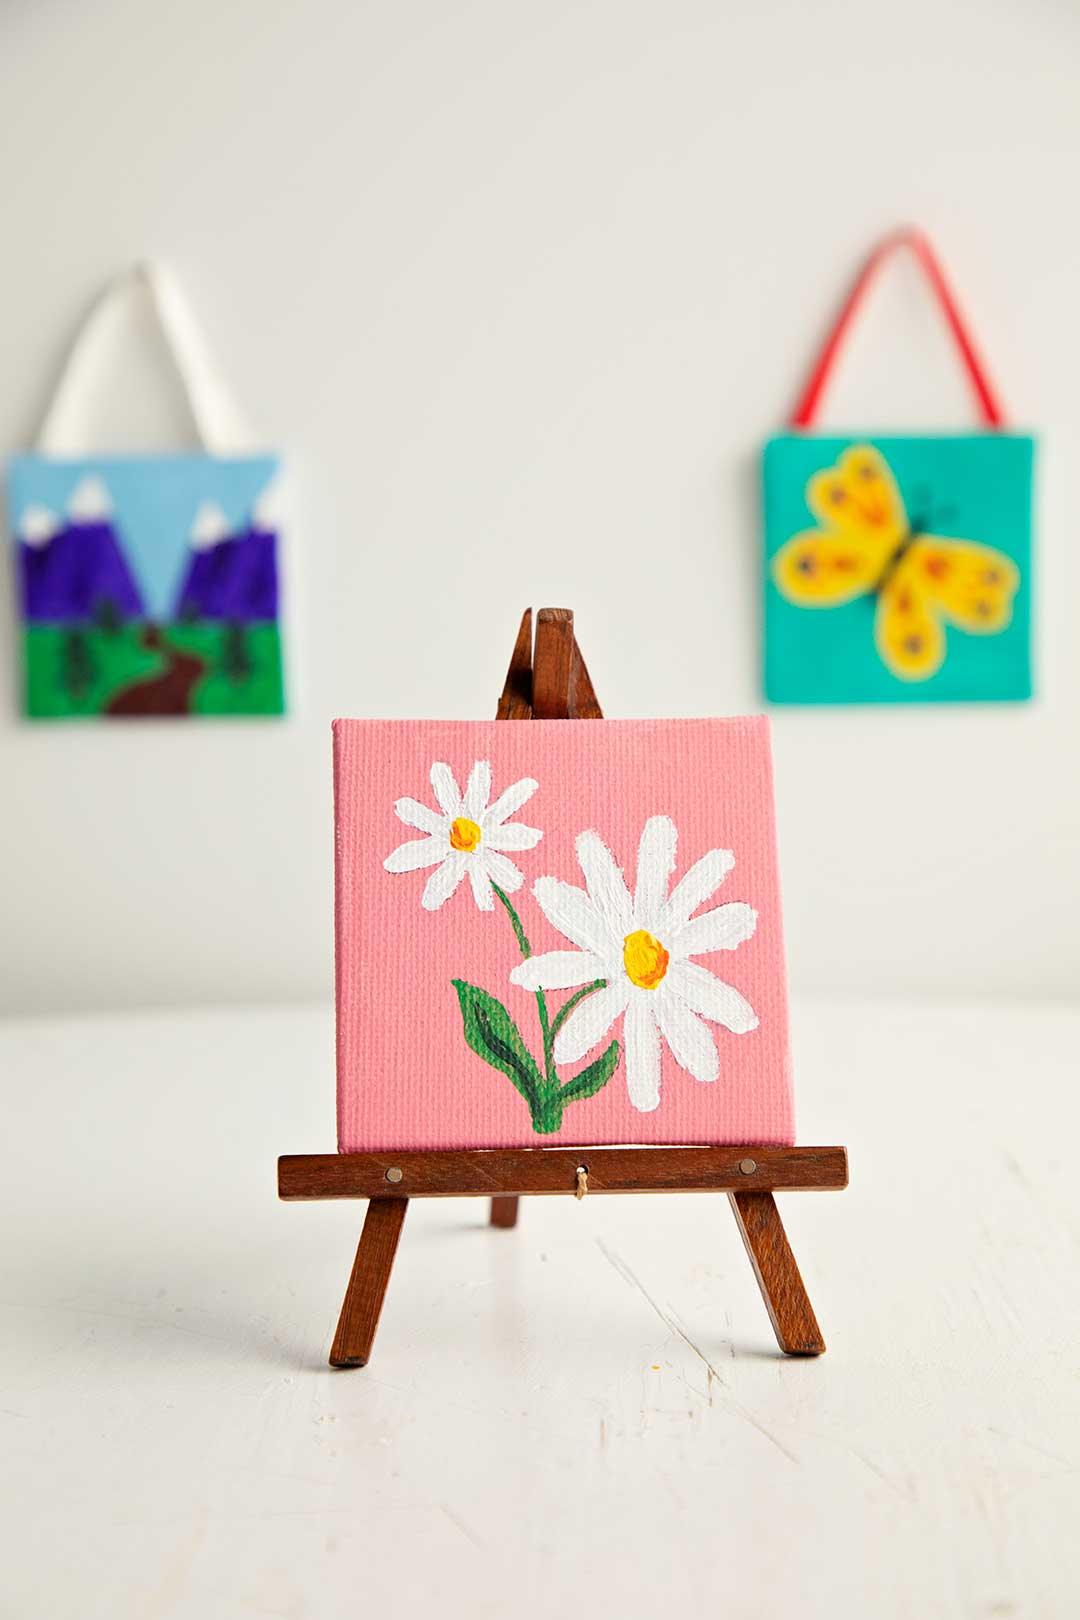 Painting on 22 Tiny Canvases! 